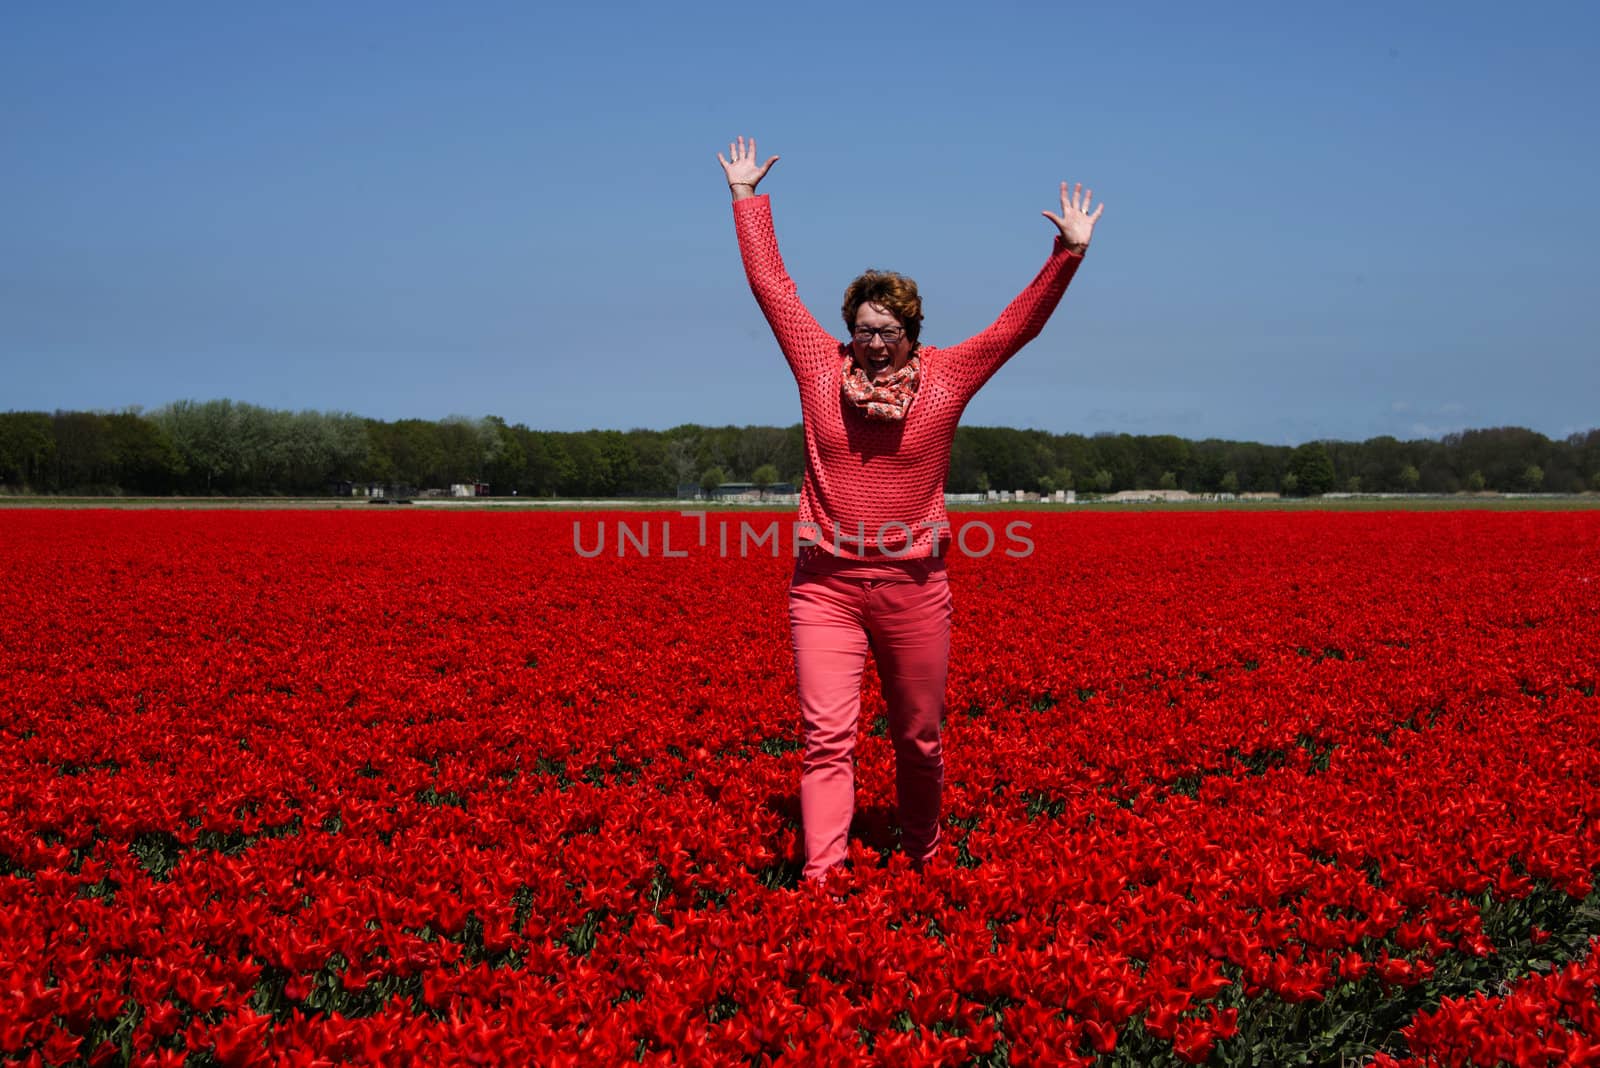 adult womanjumping  in red tulip field by compuinfoto